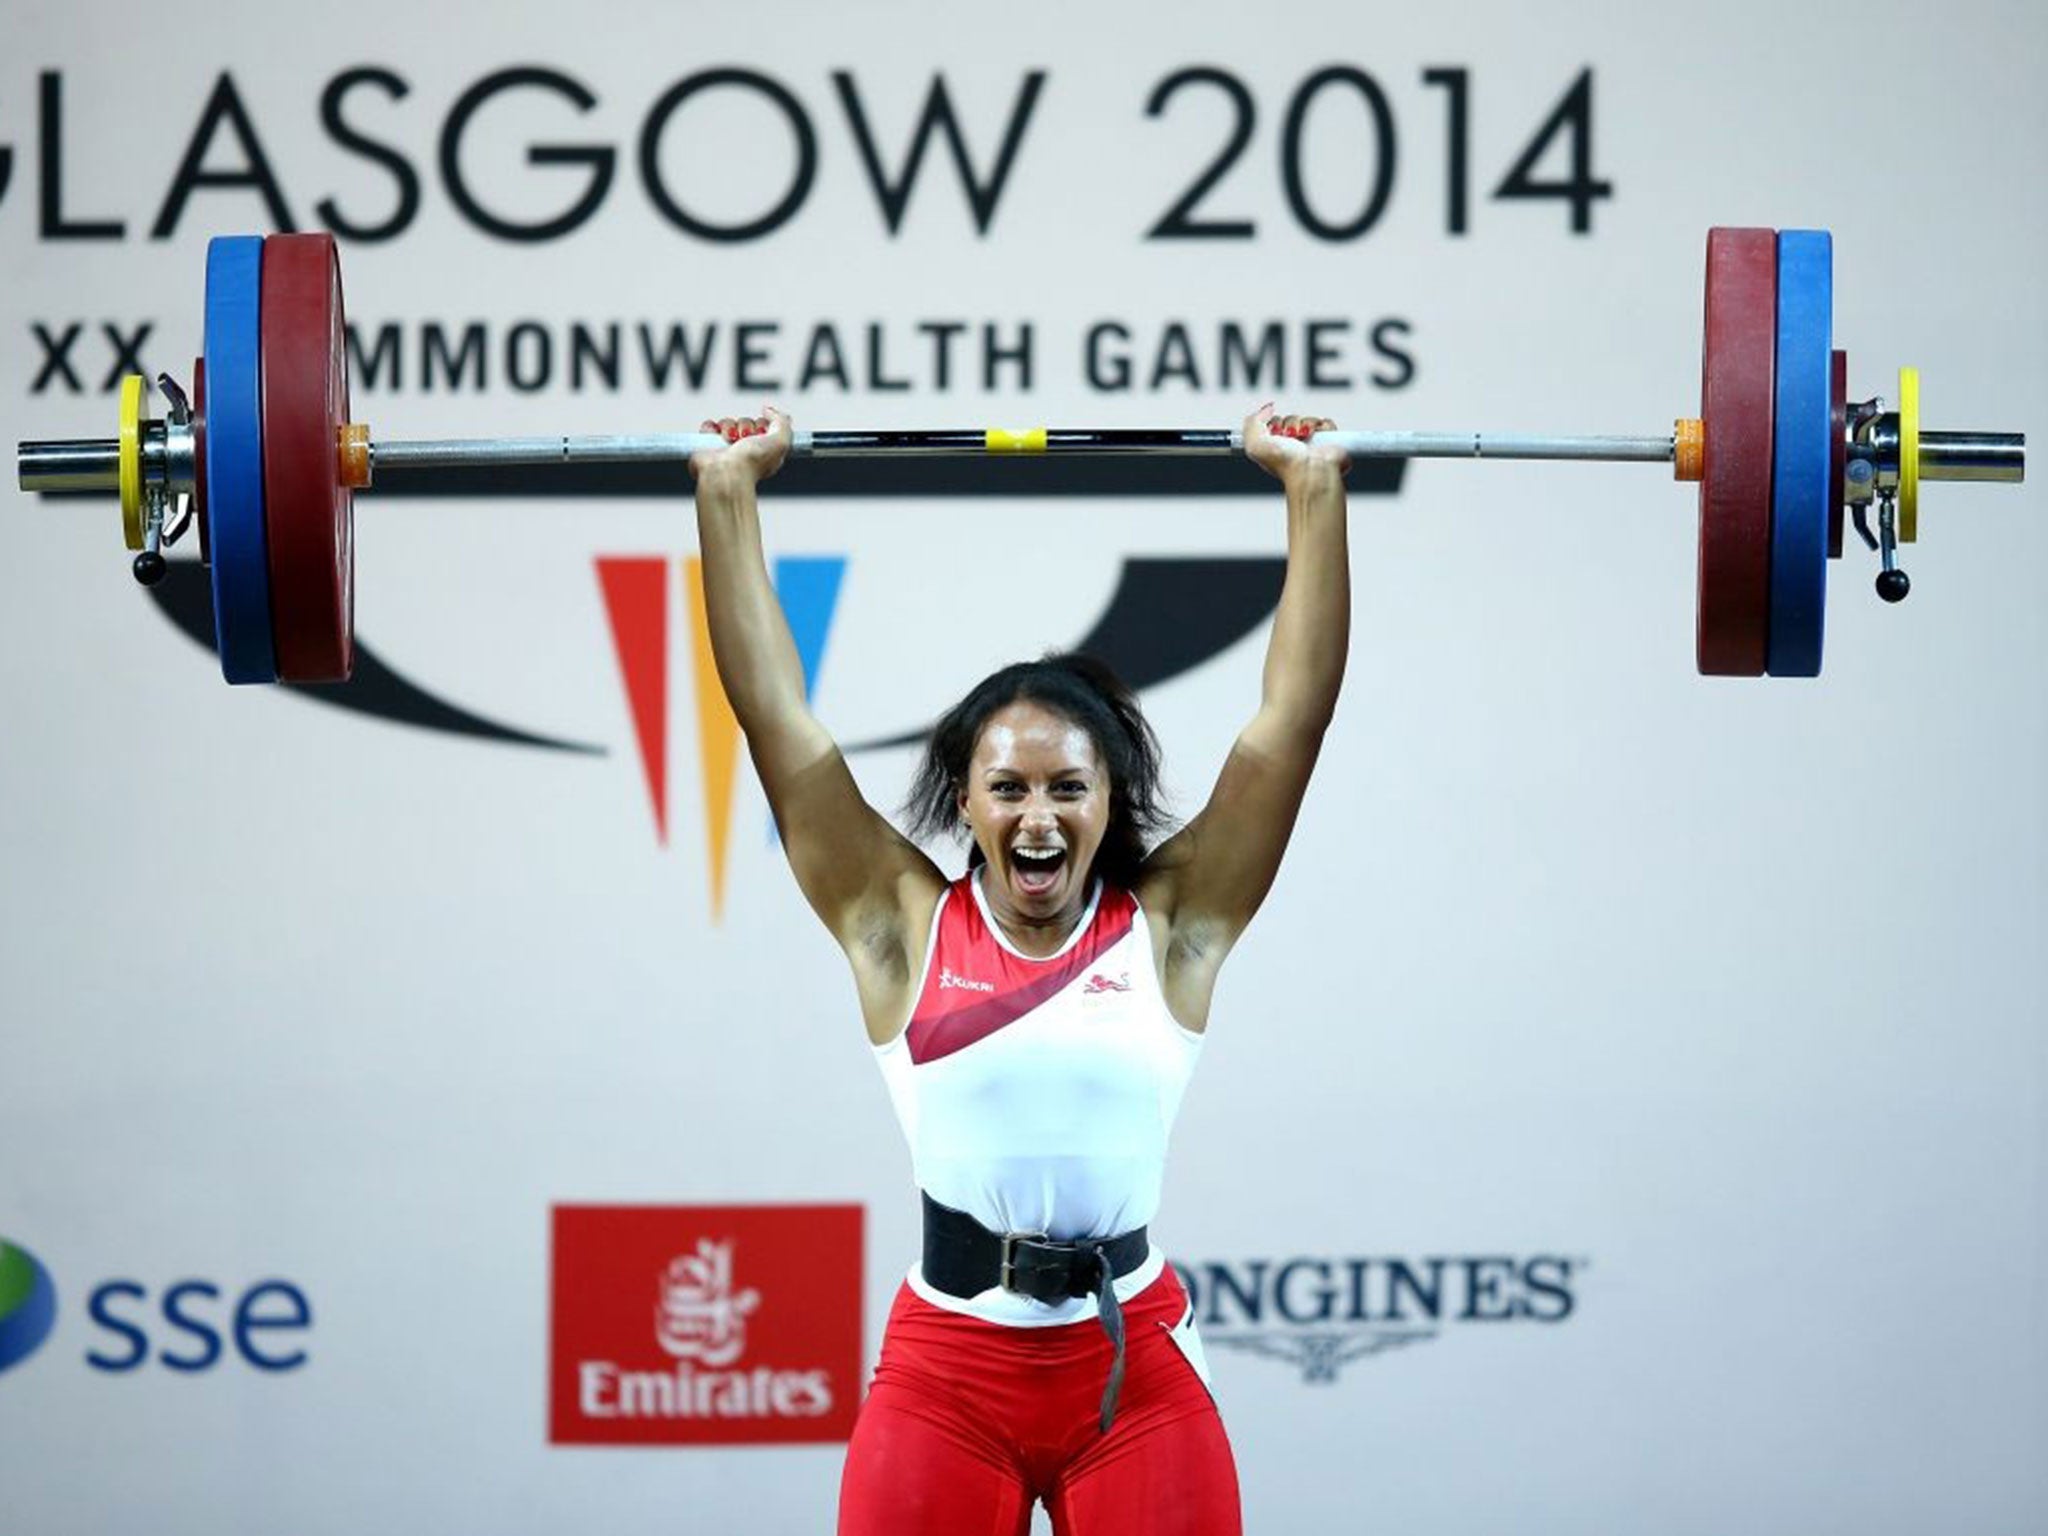 Raising the bar: Zoe Smith holds up a record-setting lift to capture a gold medal for England in the women’s 58kg event